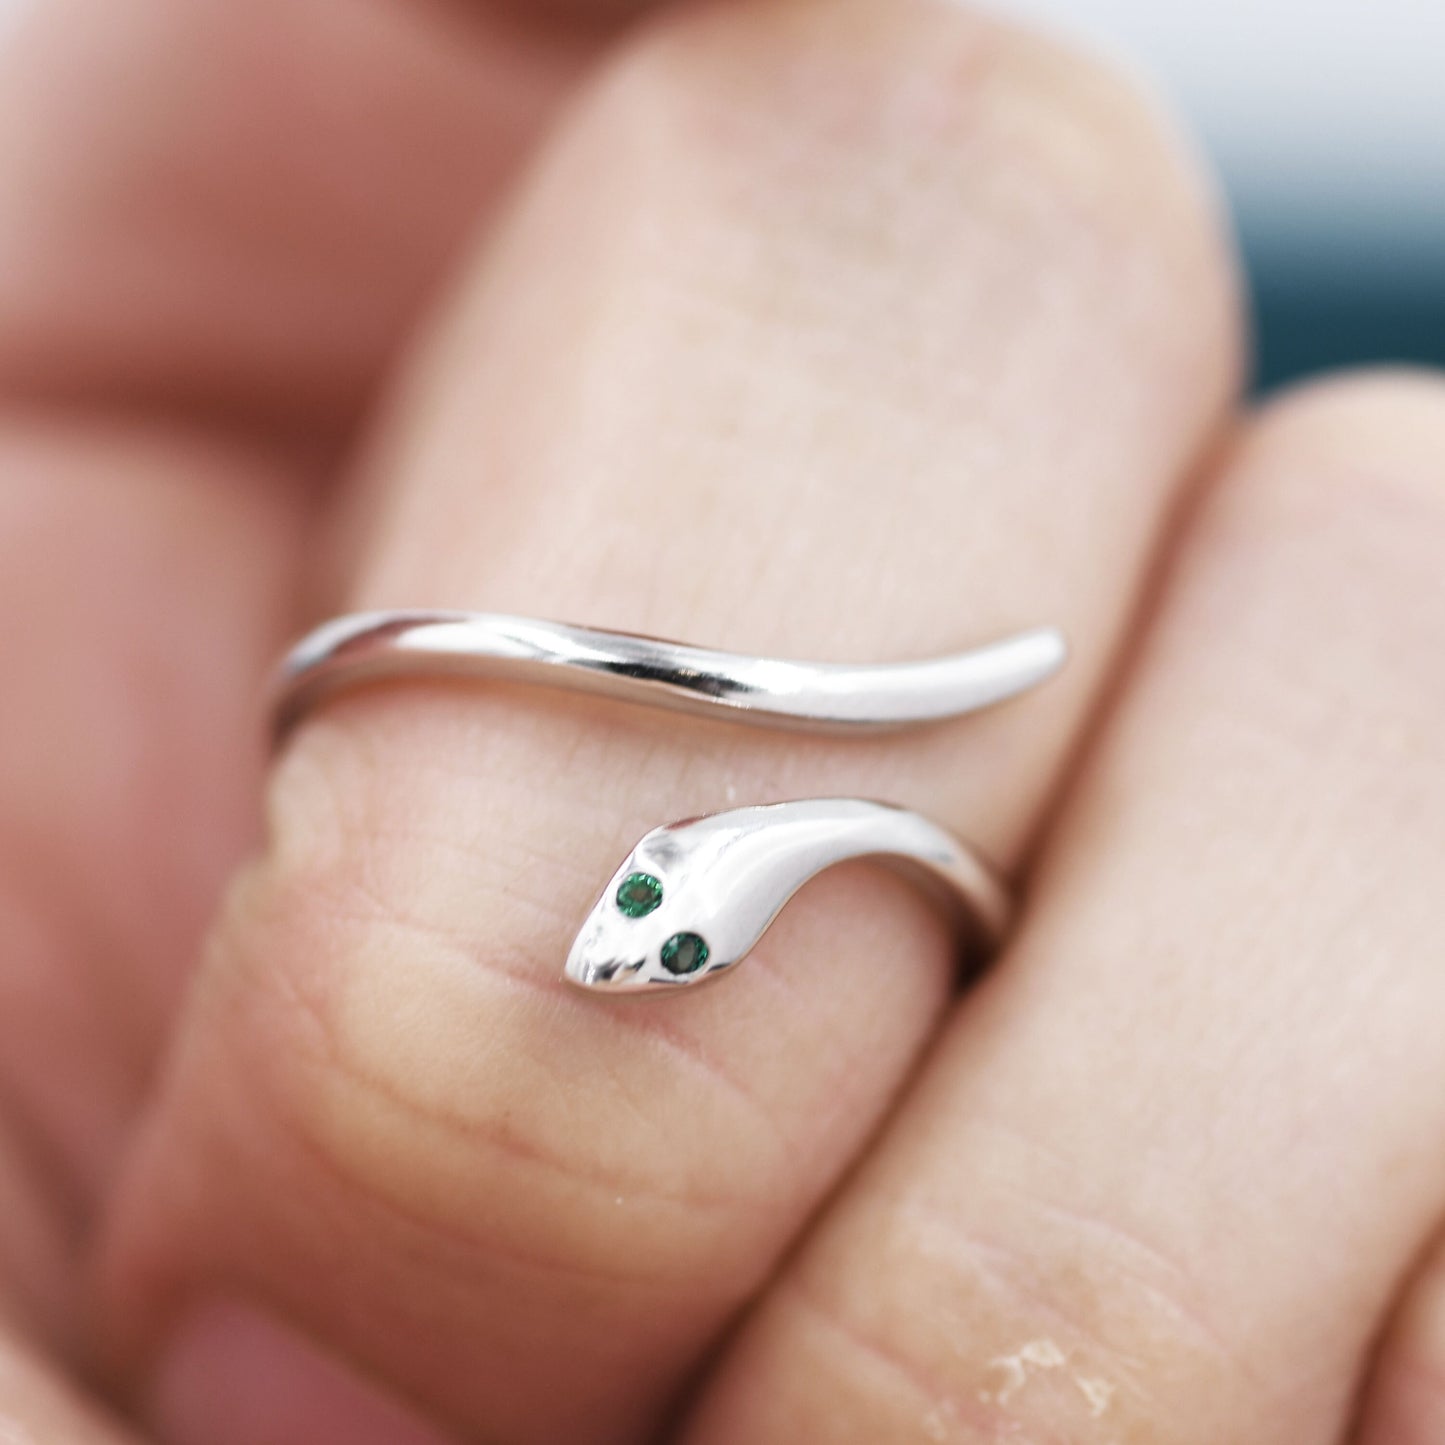 Snake Wrap Ring in Sterling Silver - Emerald Green Eyed Snake Ring - Adjustable and Available in Three Sizes